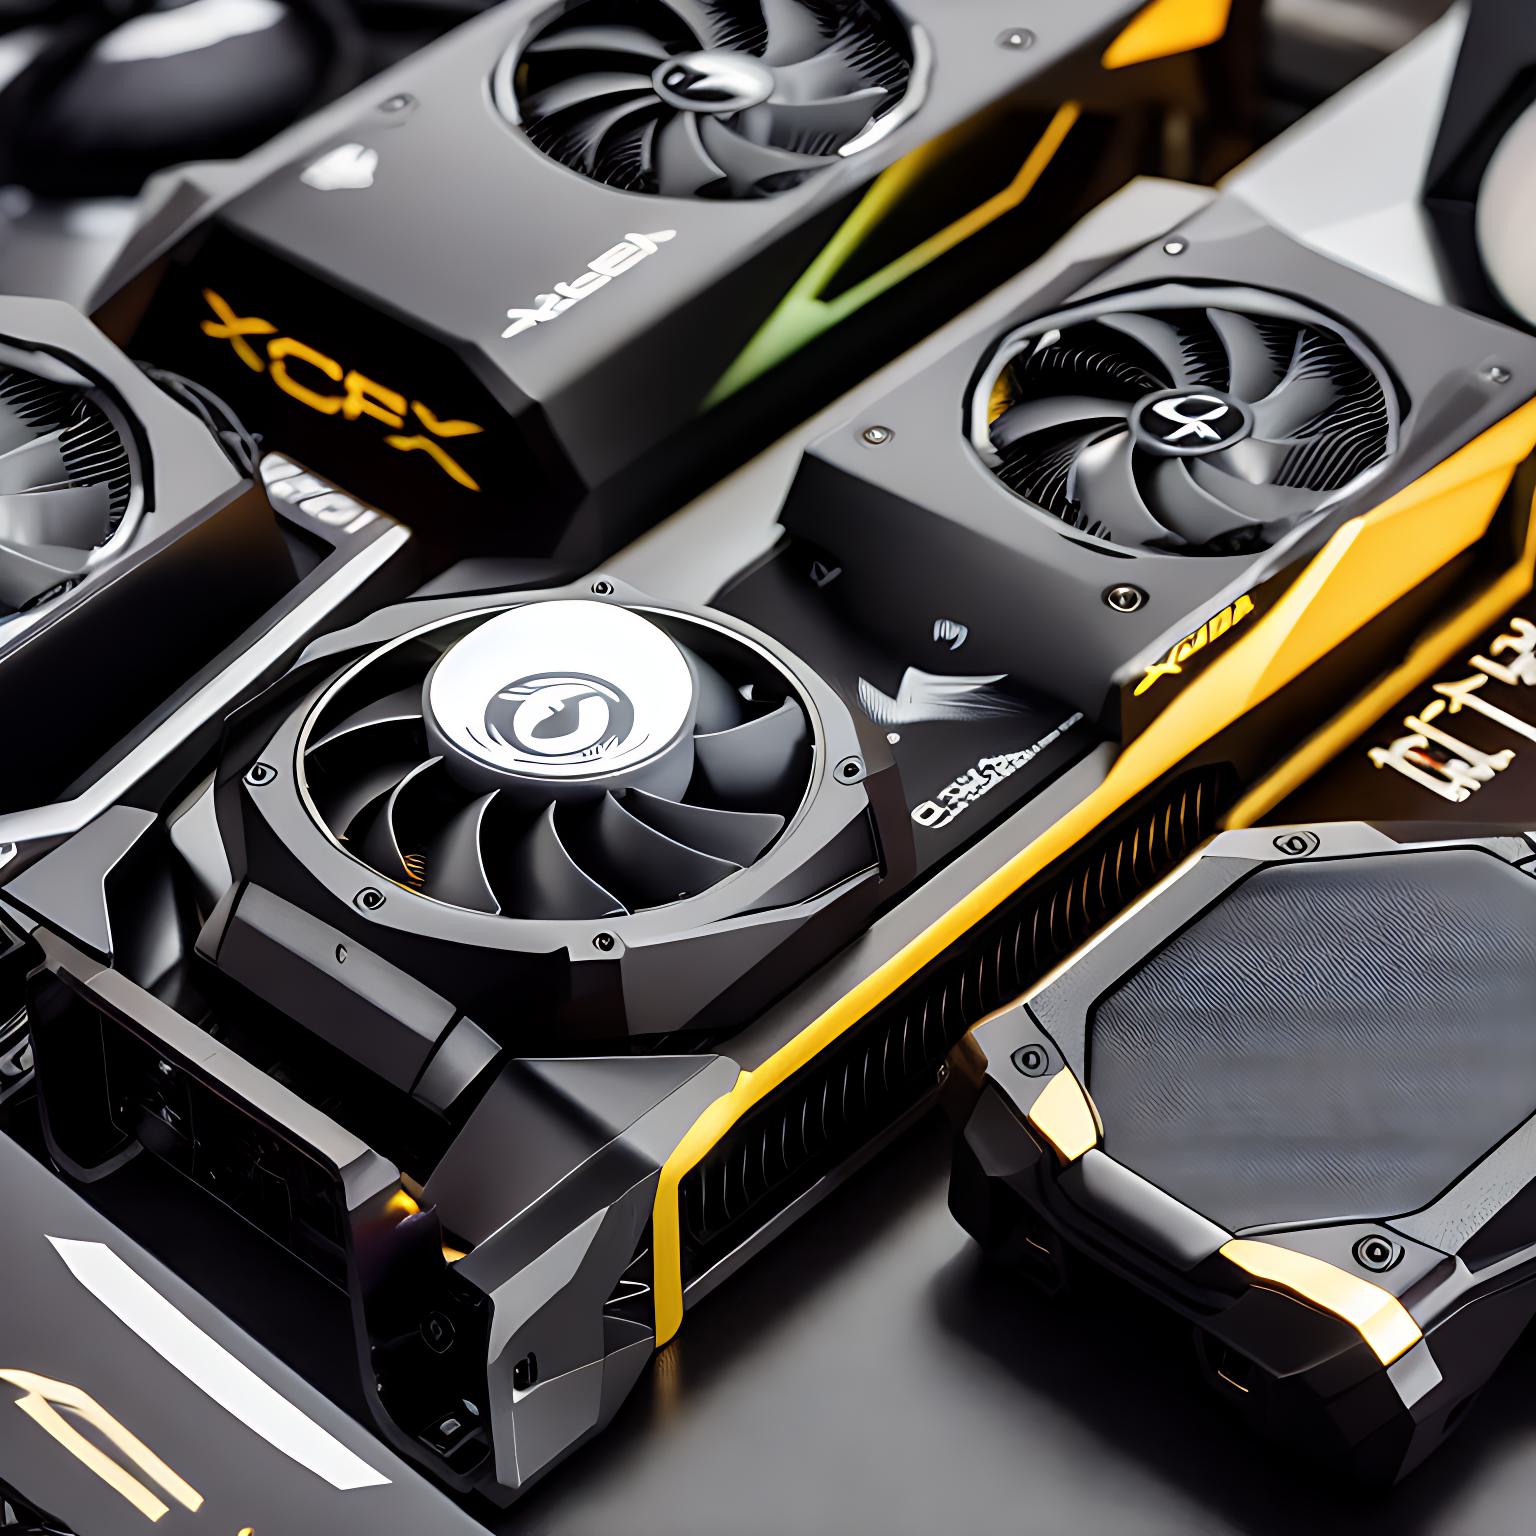 Is XFX a Good Gaming Brand?